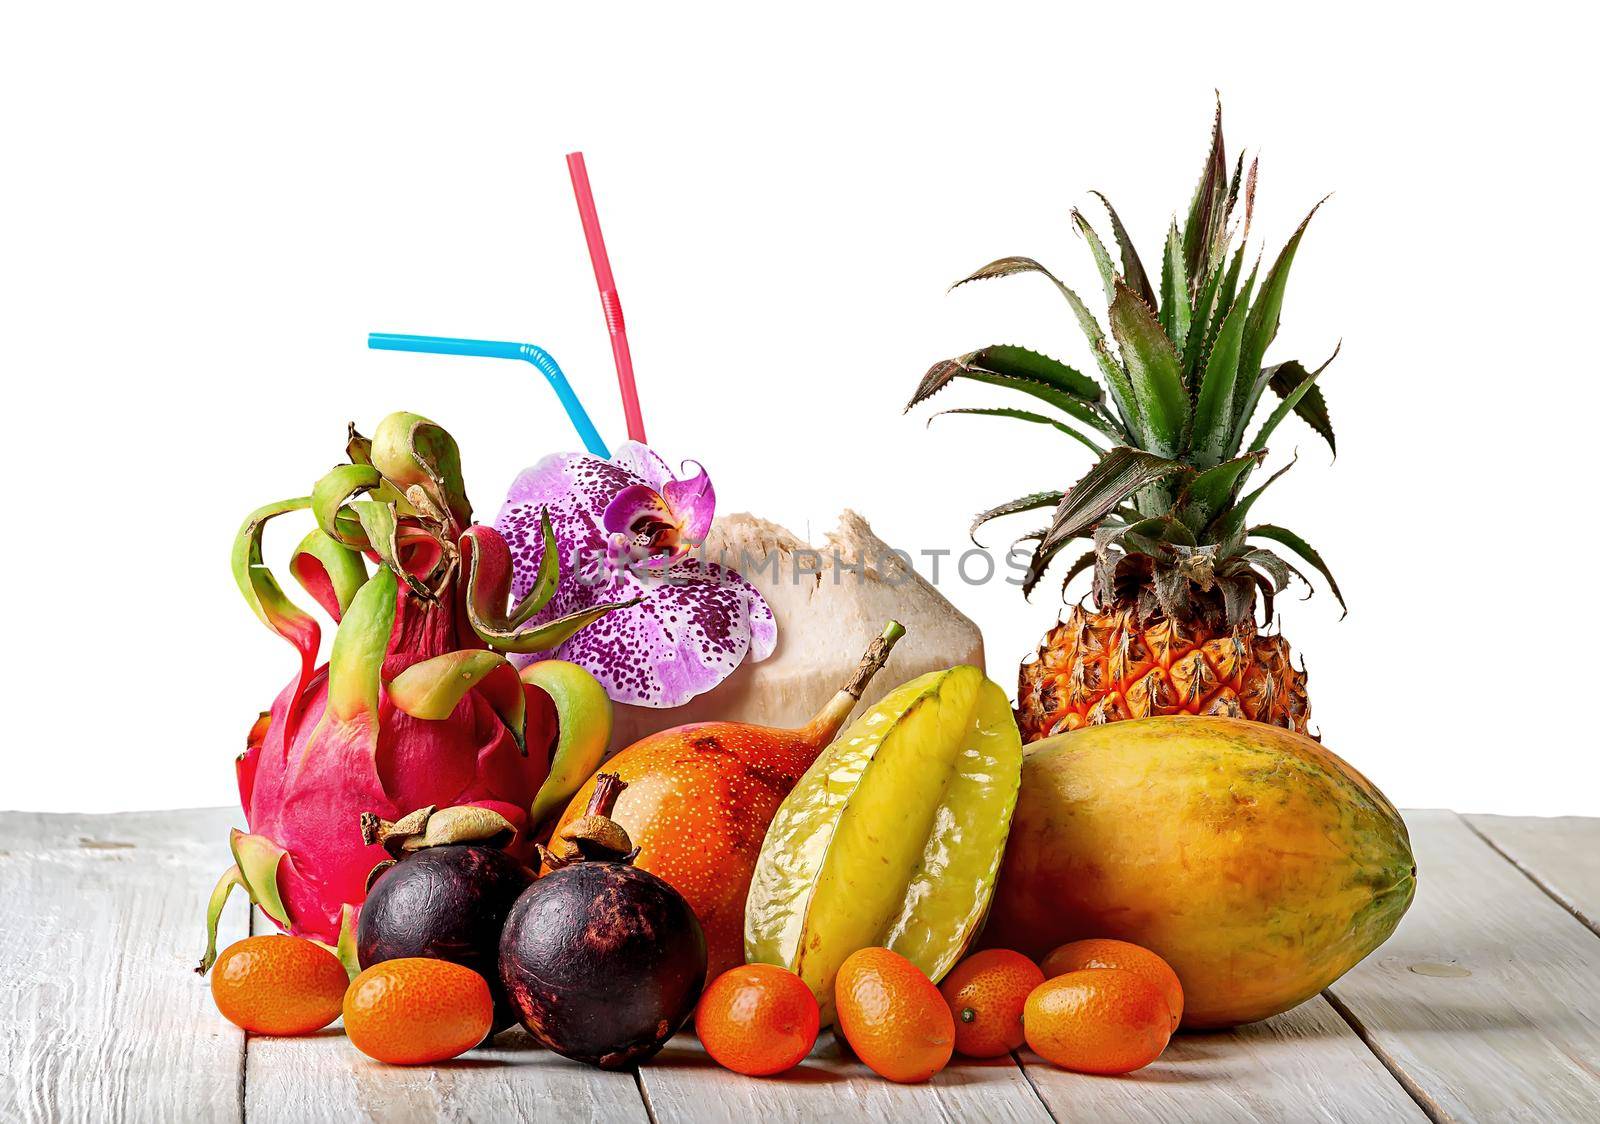 Tropical fruits on wooden table isolated on white background